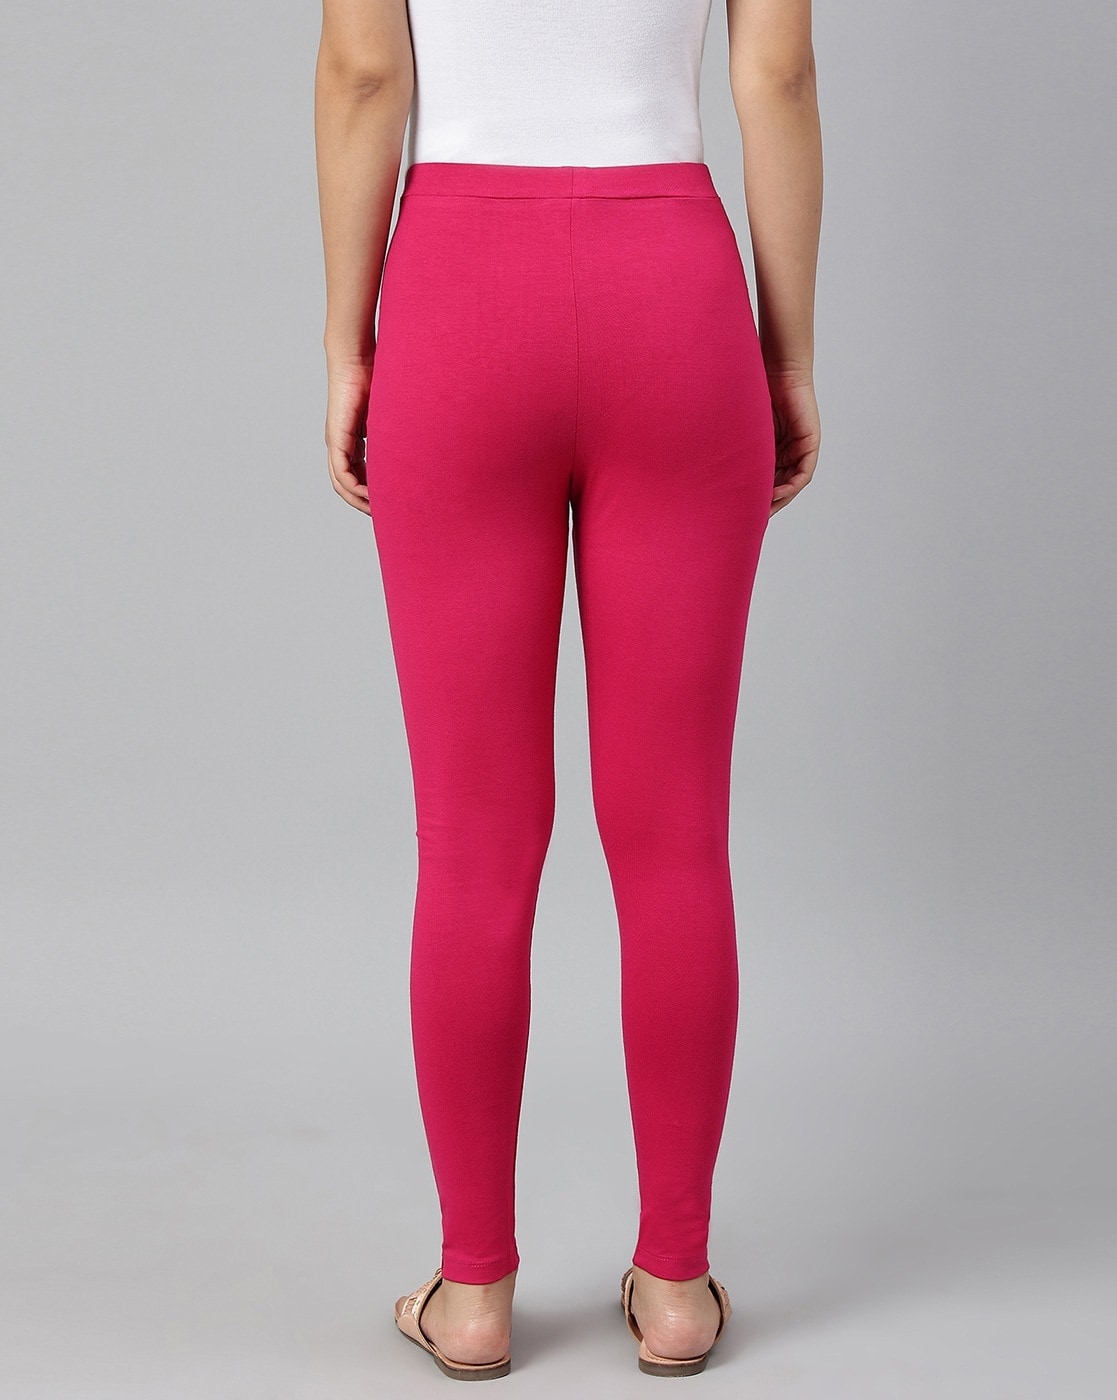 Buy Suprenx High Waist Workout Leggings for Women Full Length Pink Yoga  Pants,Naked Feeling Seamless Yoga Tights, Pink, Small at Amazon.in